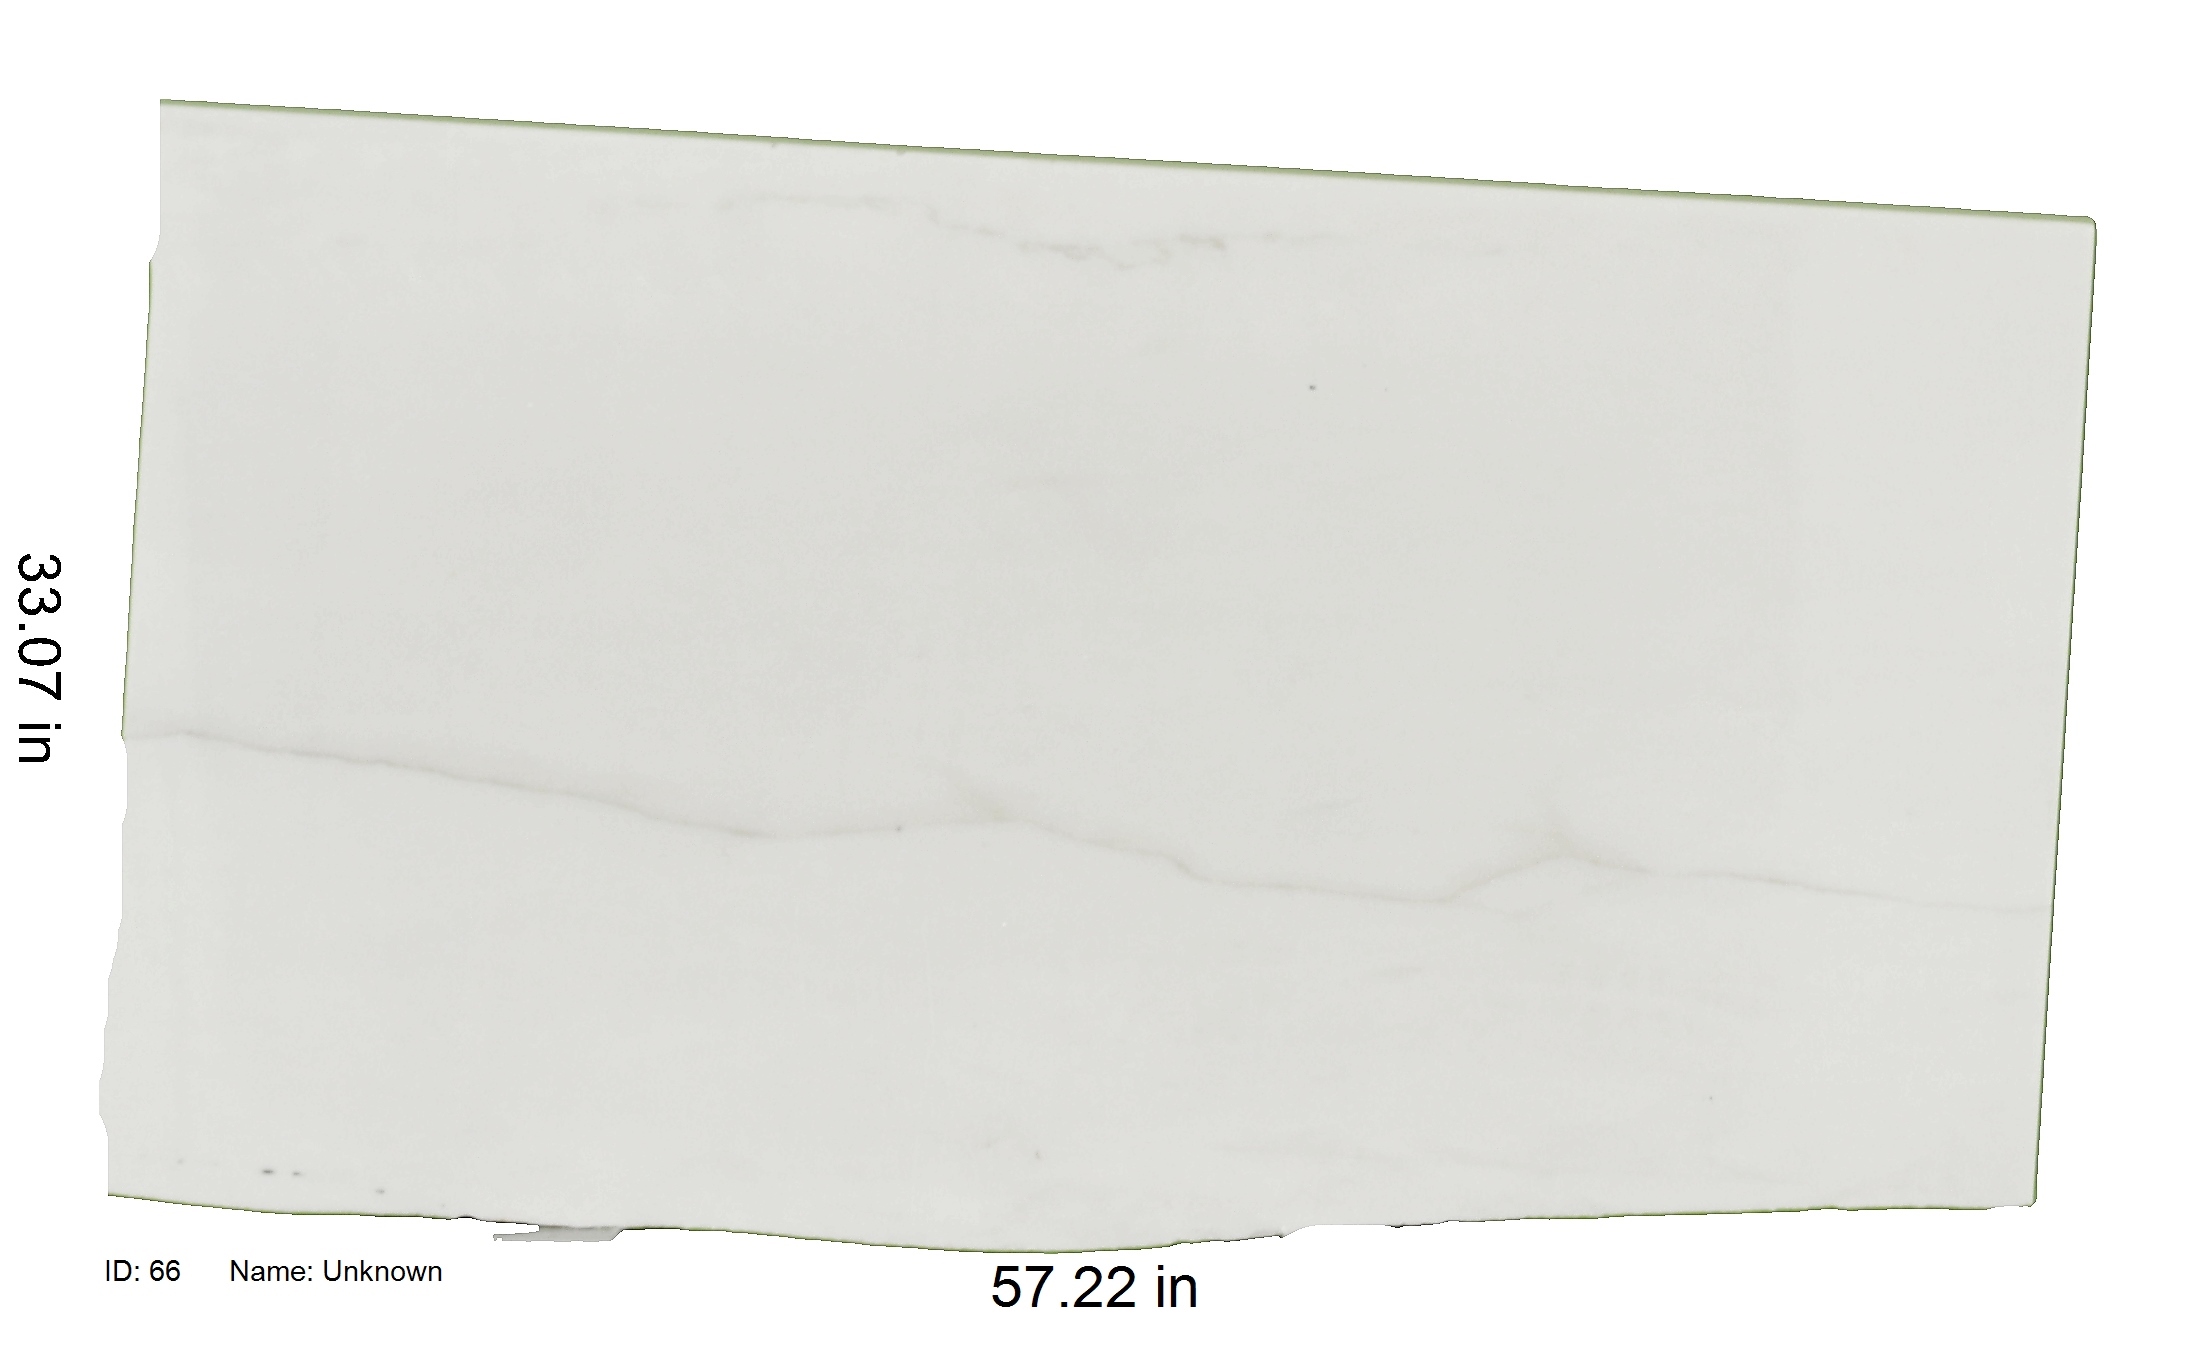 Ivory Marble With Grey Veining<br />
ID 66<br />
Name: Unknown<br />
Size: 33.07x57.22